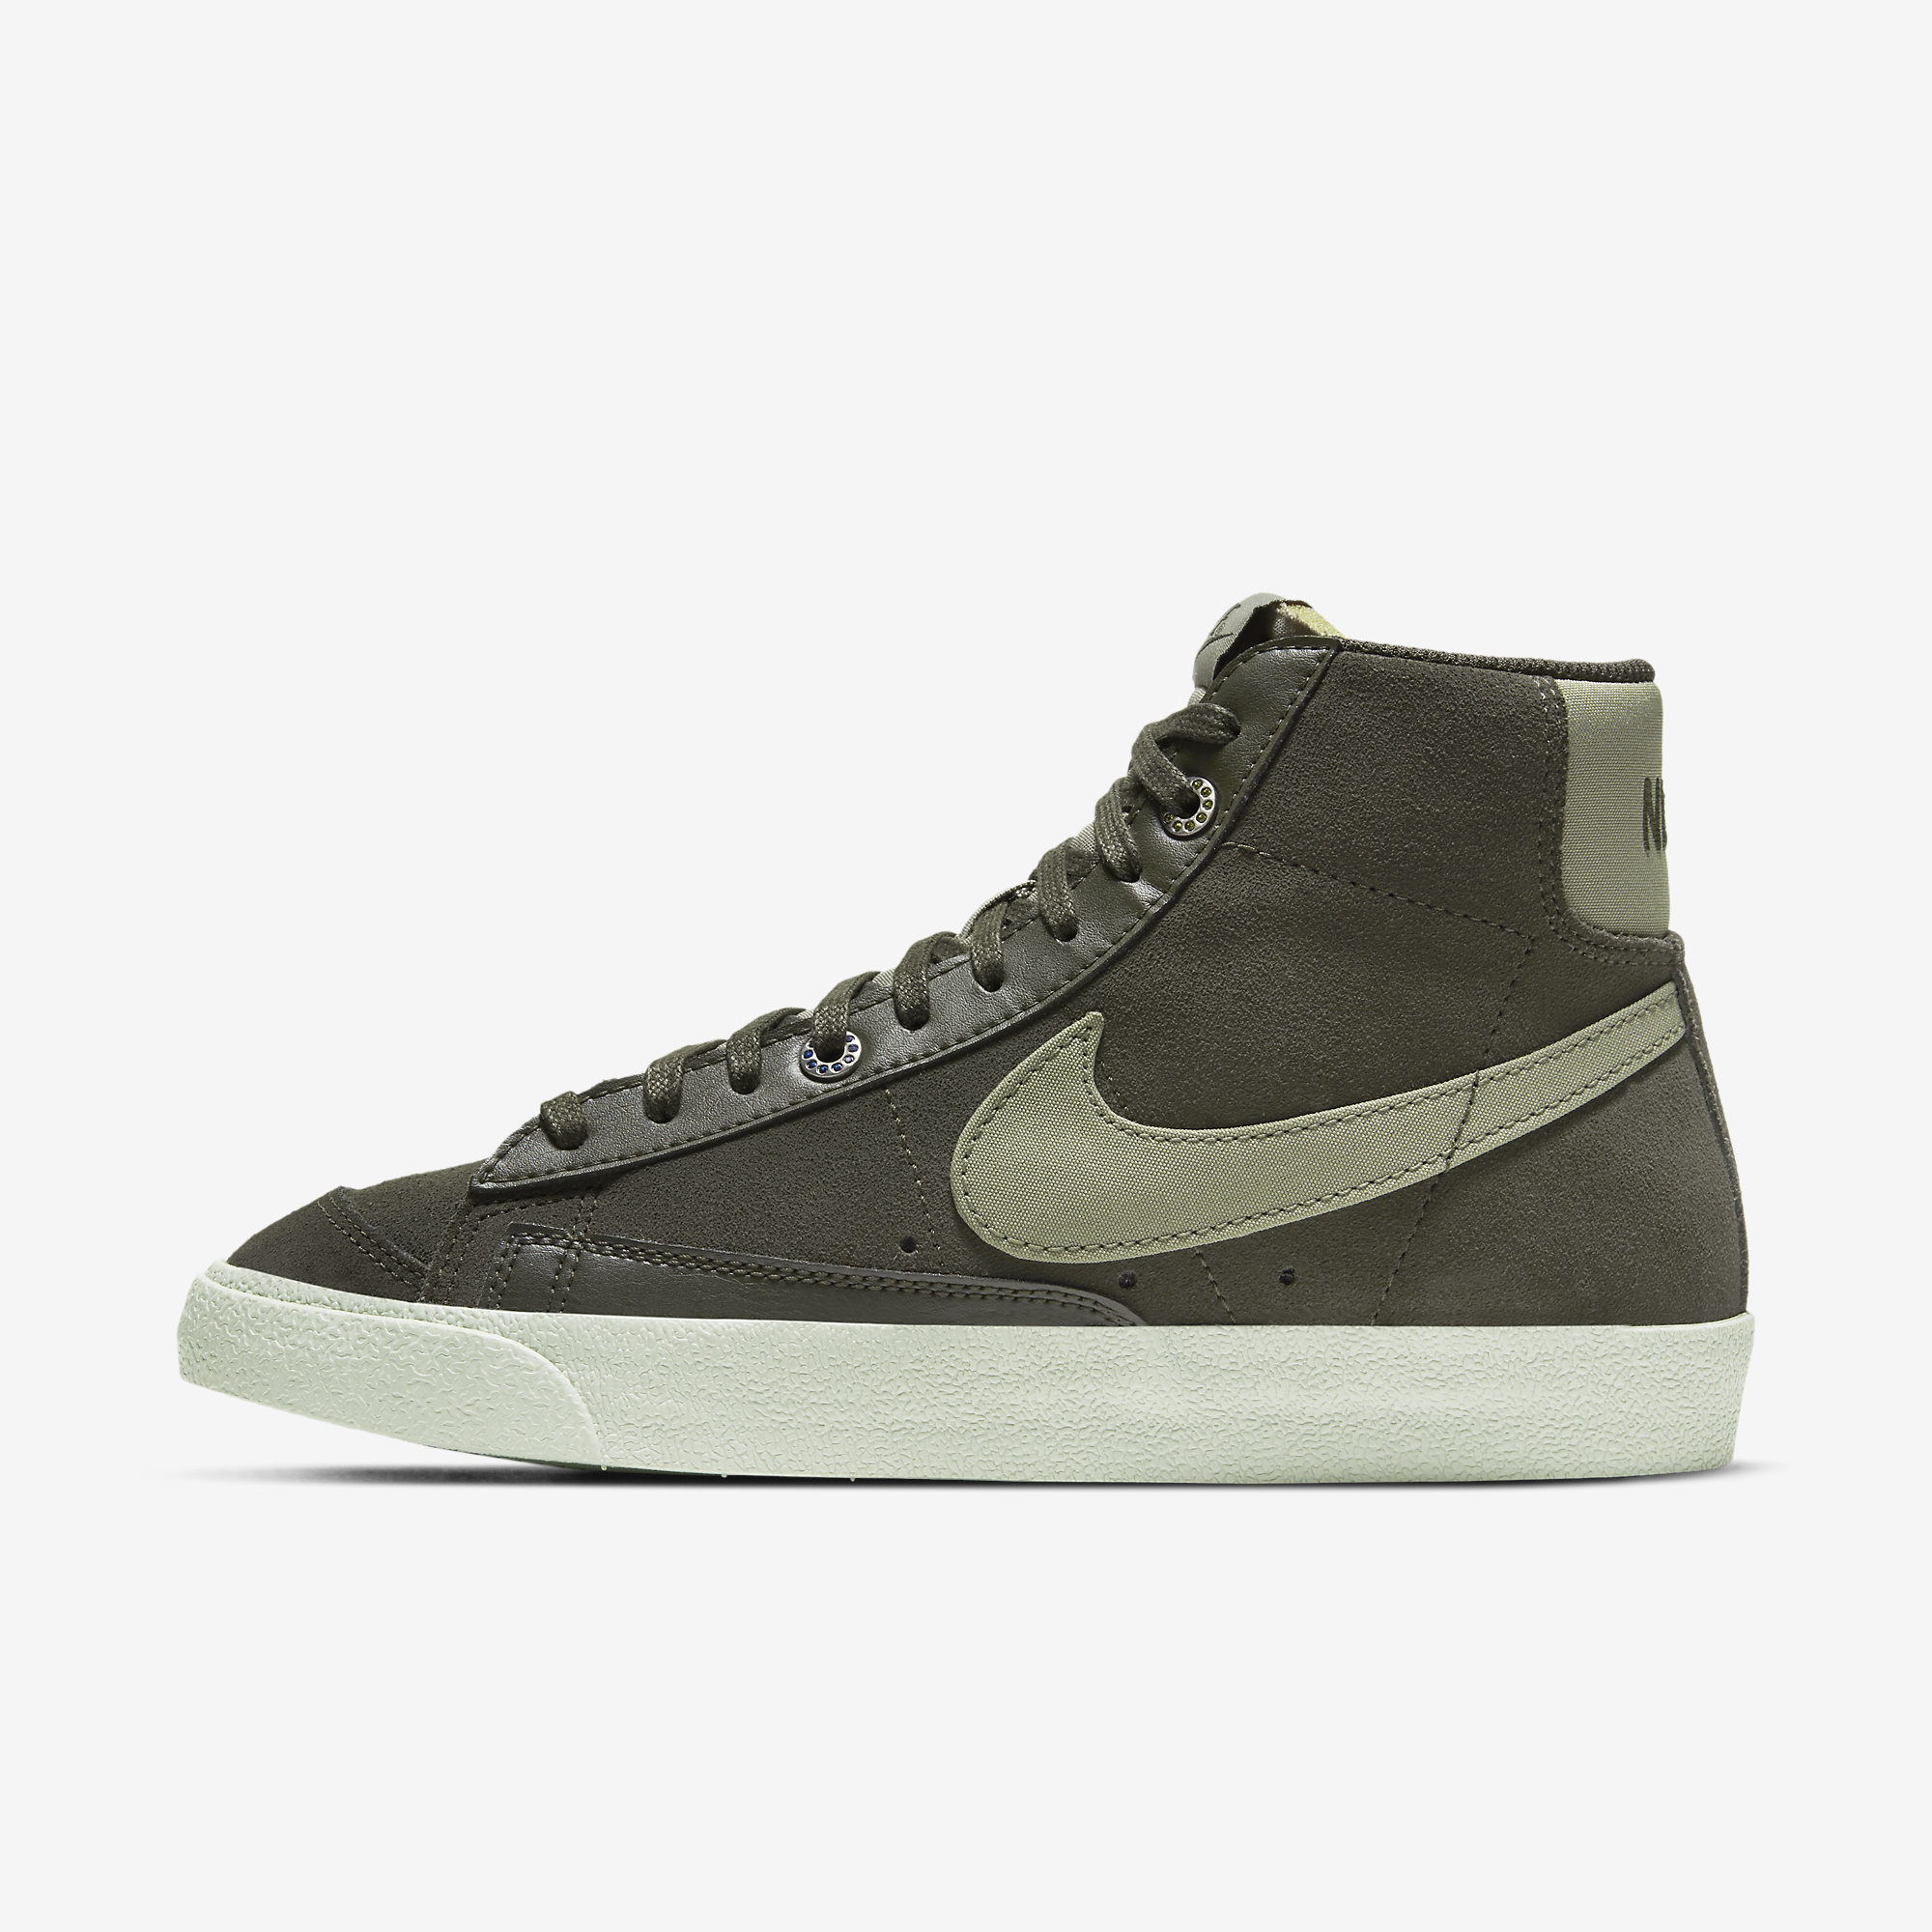 Nike Blazer Mid '77 Olive DH4271-300 Release Date | SneakerNews.com